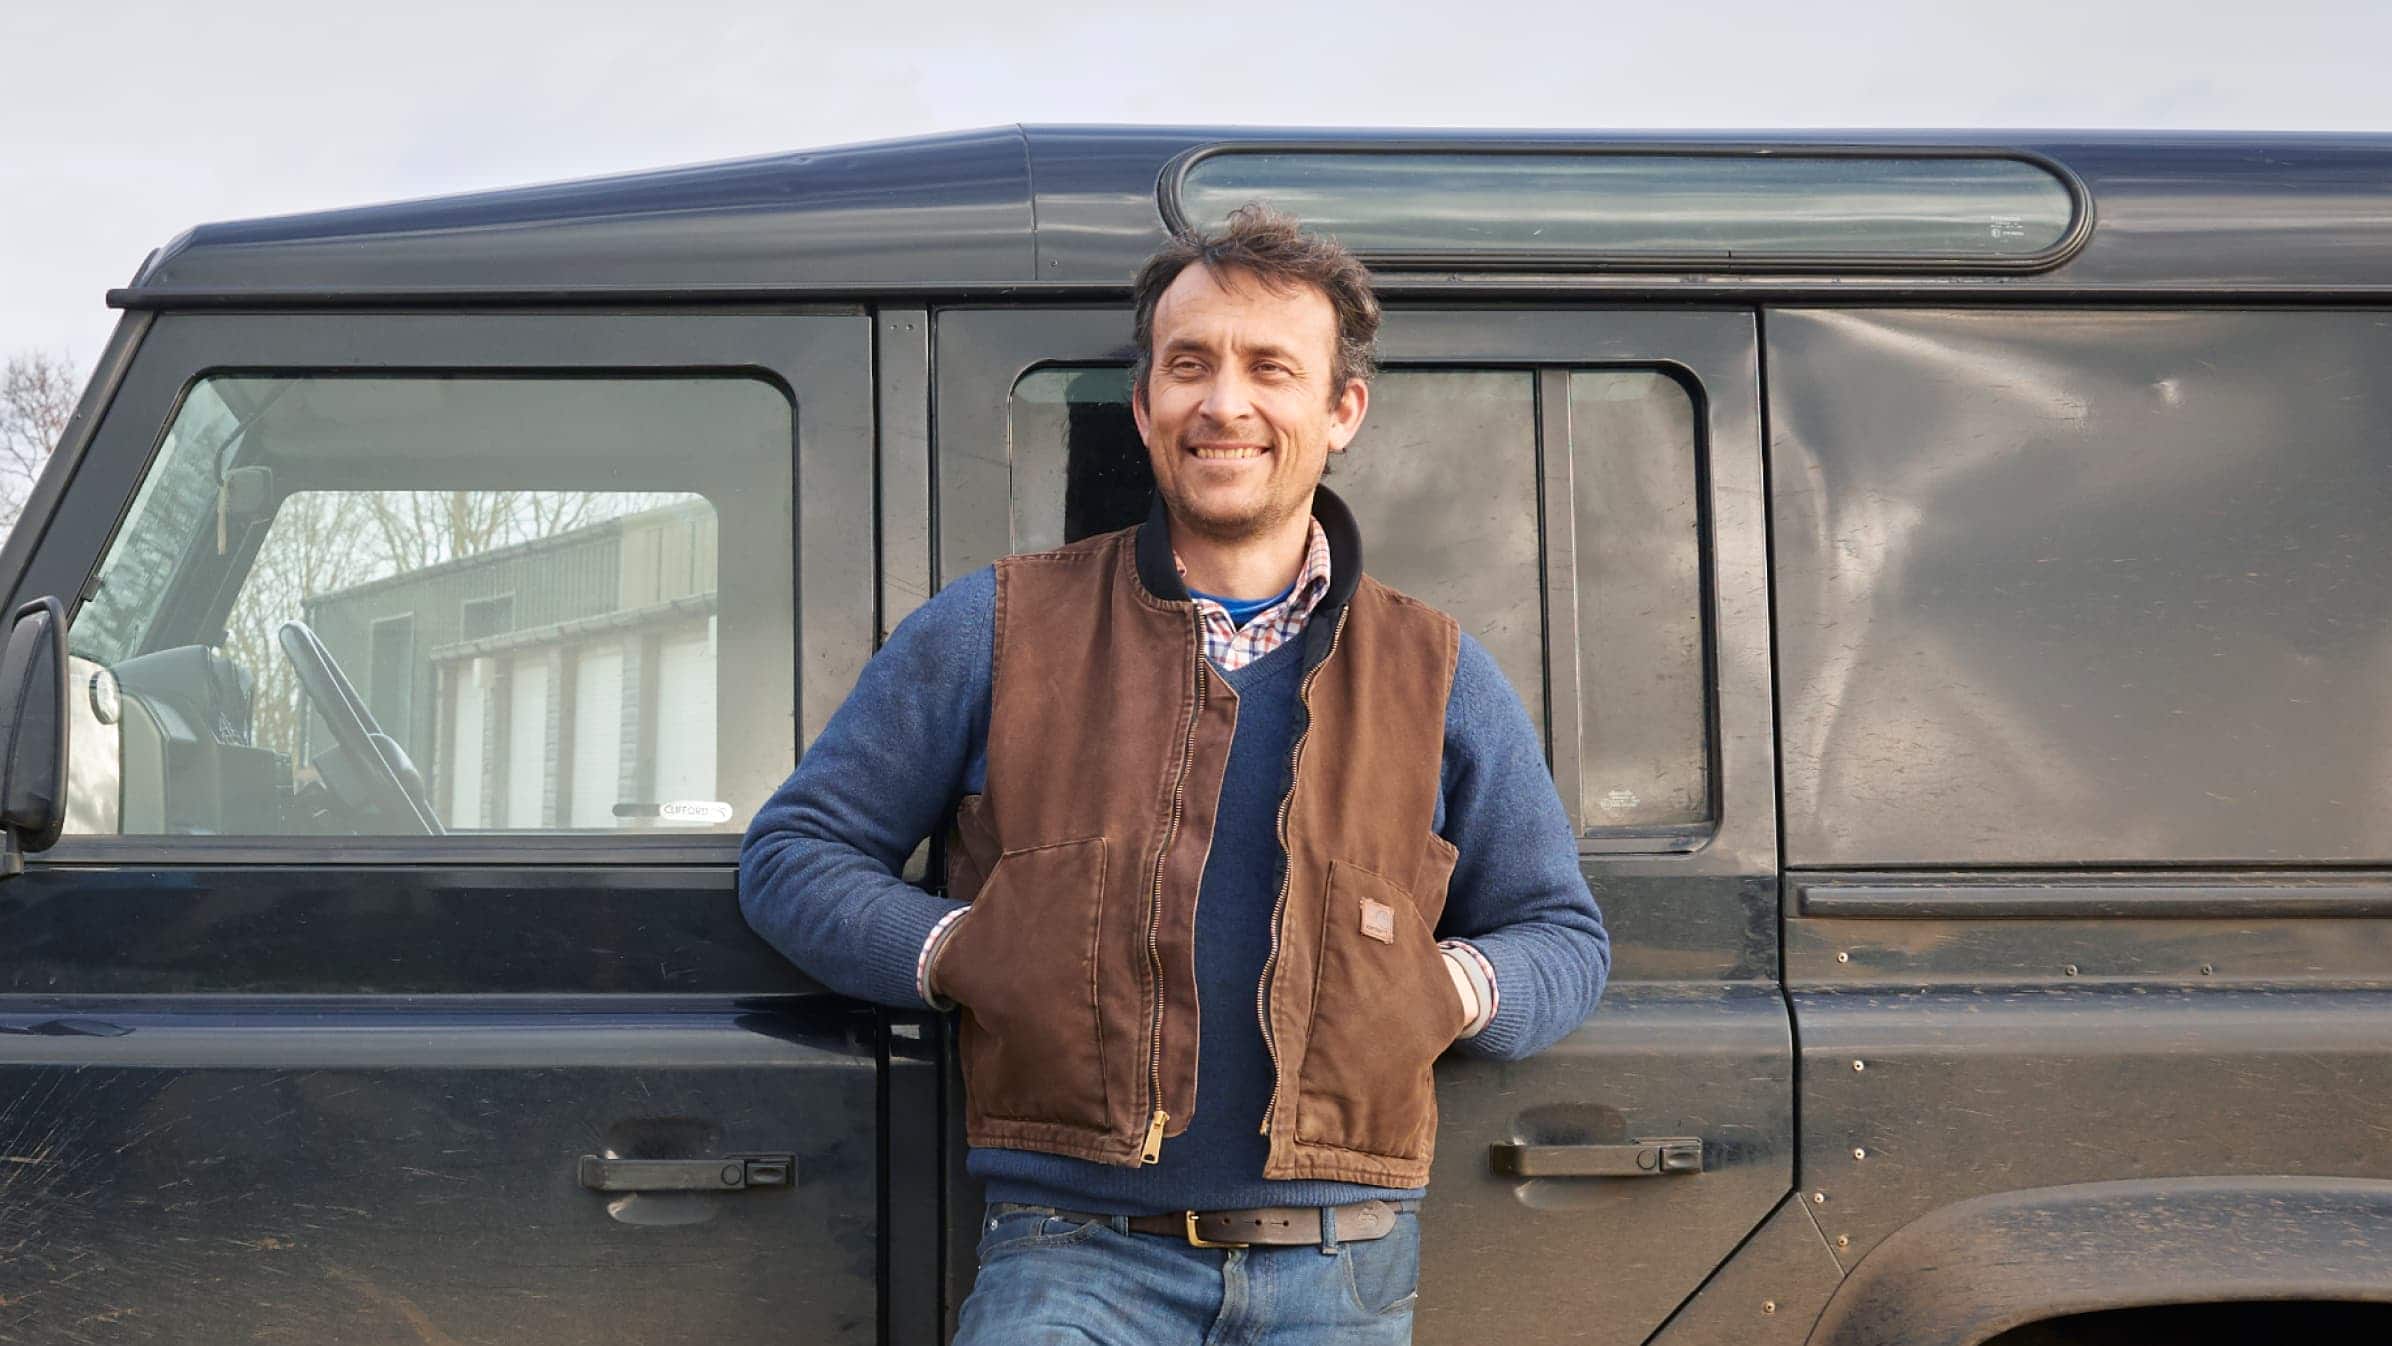 Richard Fishenden, founder of blacksmith business Made by the Forge, stands in front of a Land Rover truck.